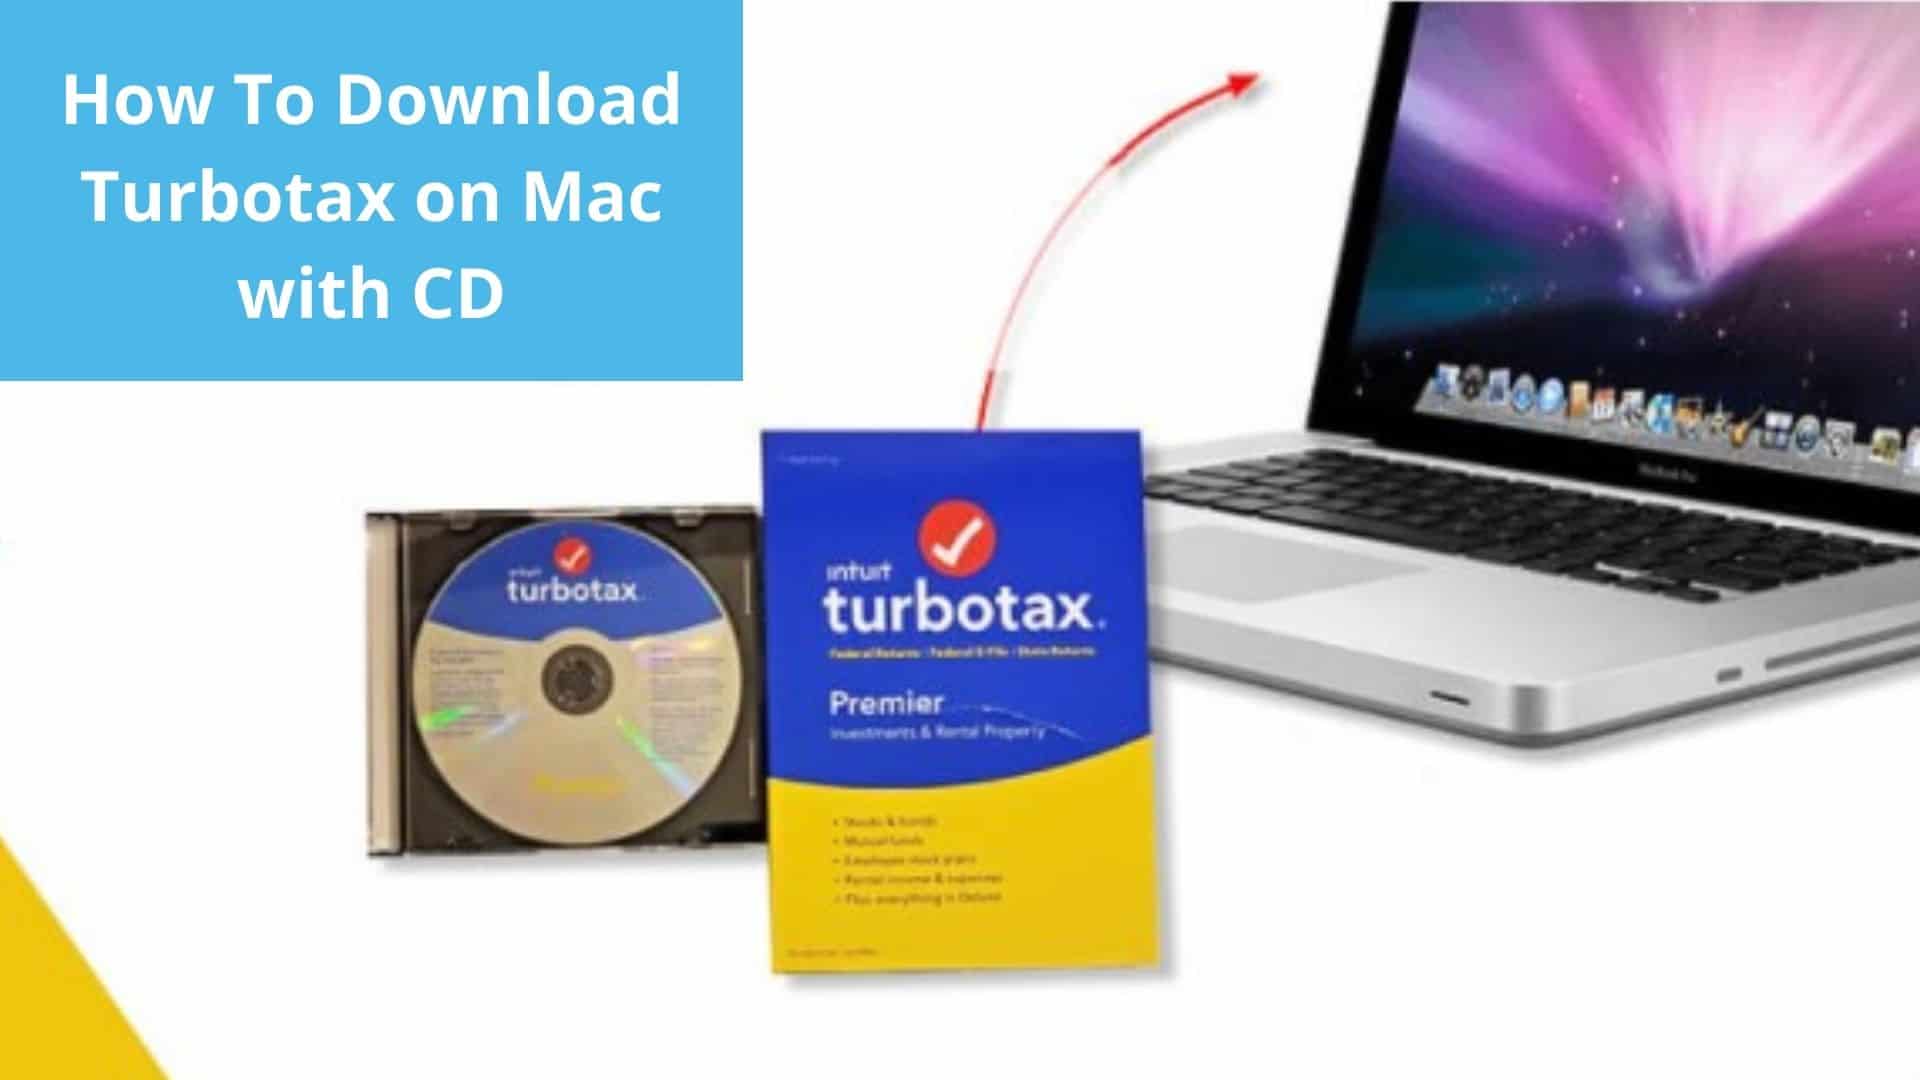 turbotax software download: Download Turbotax using CD